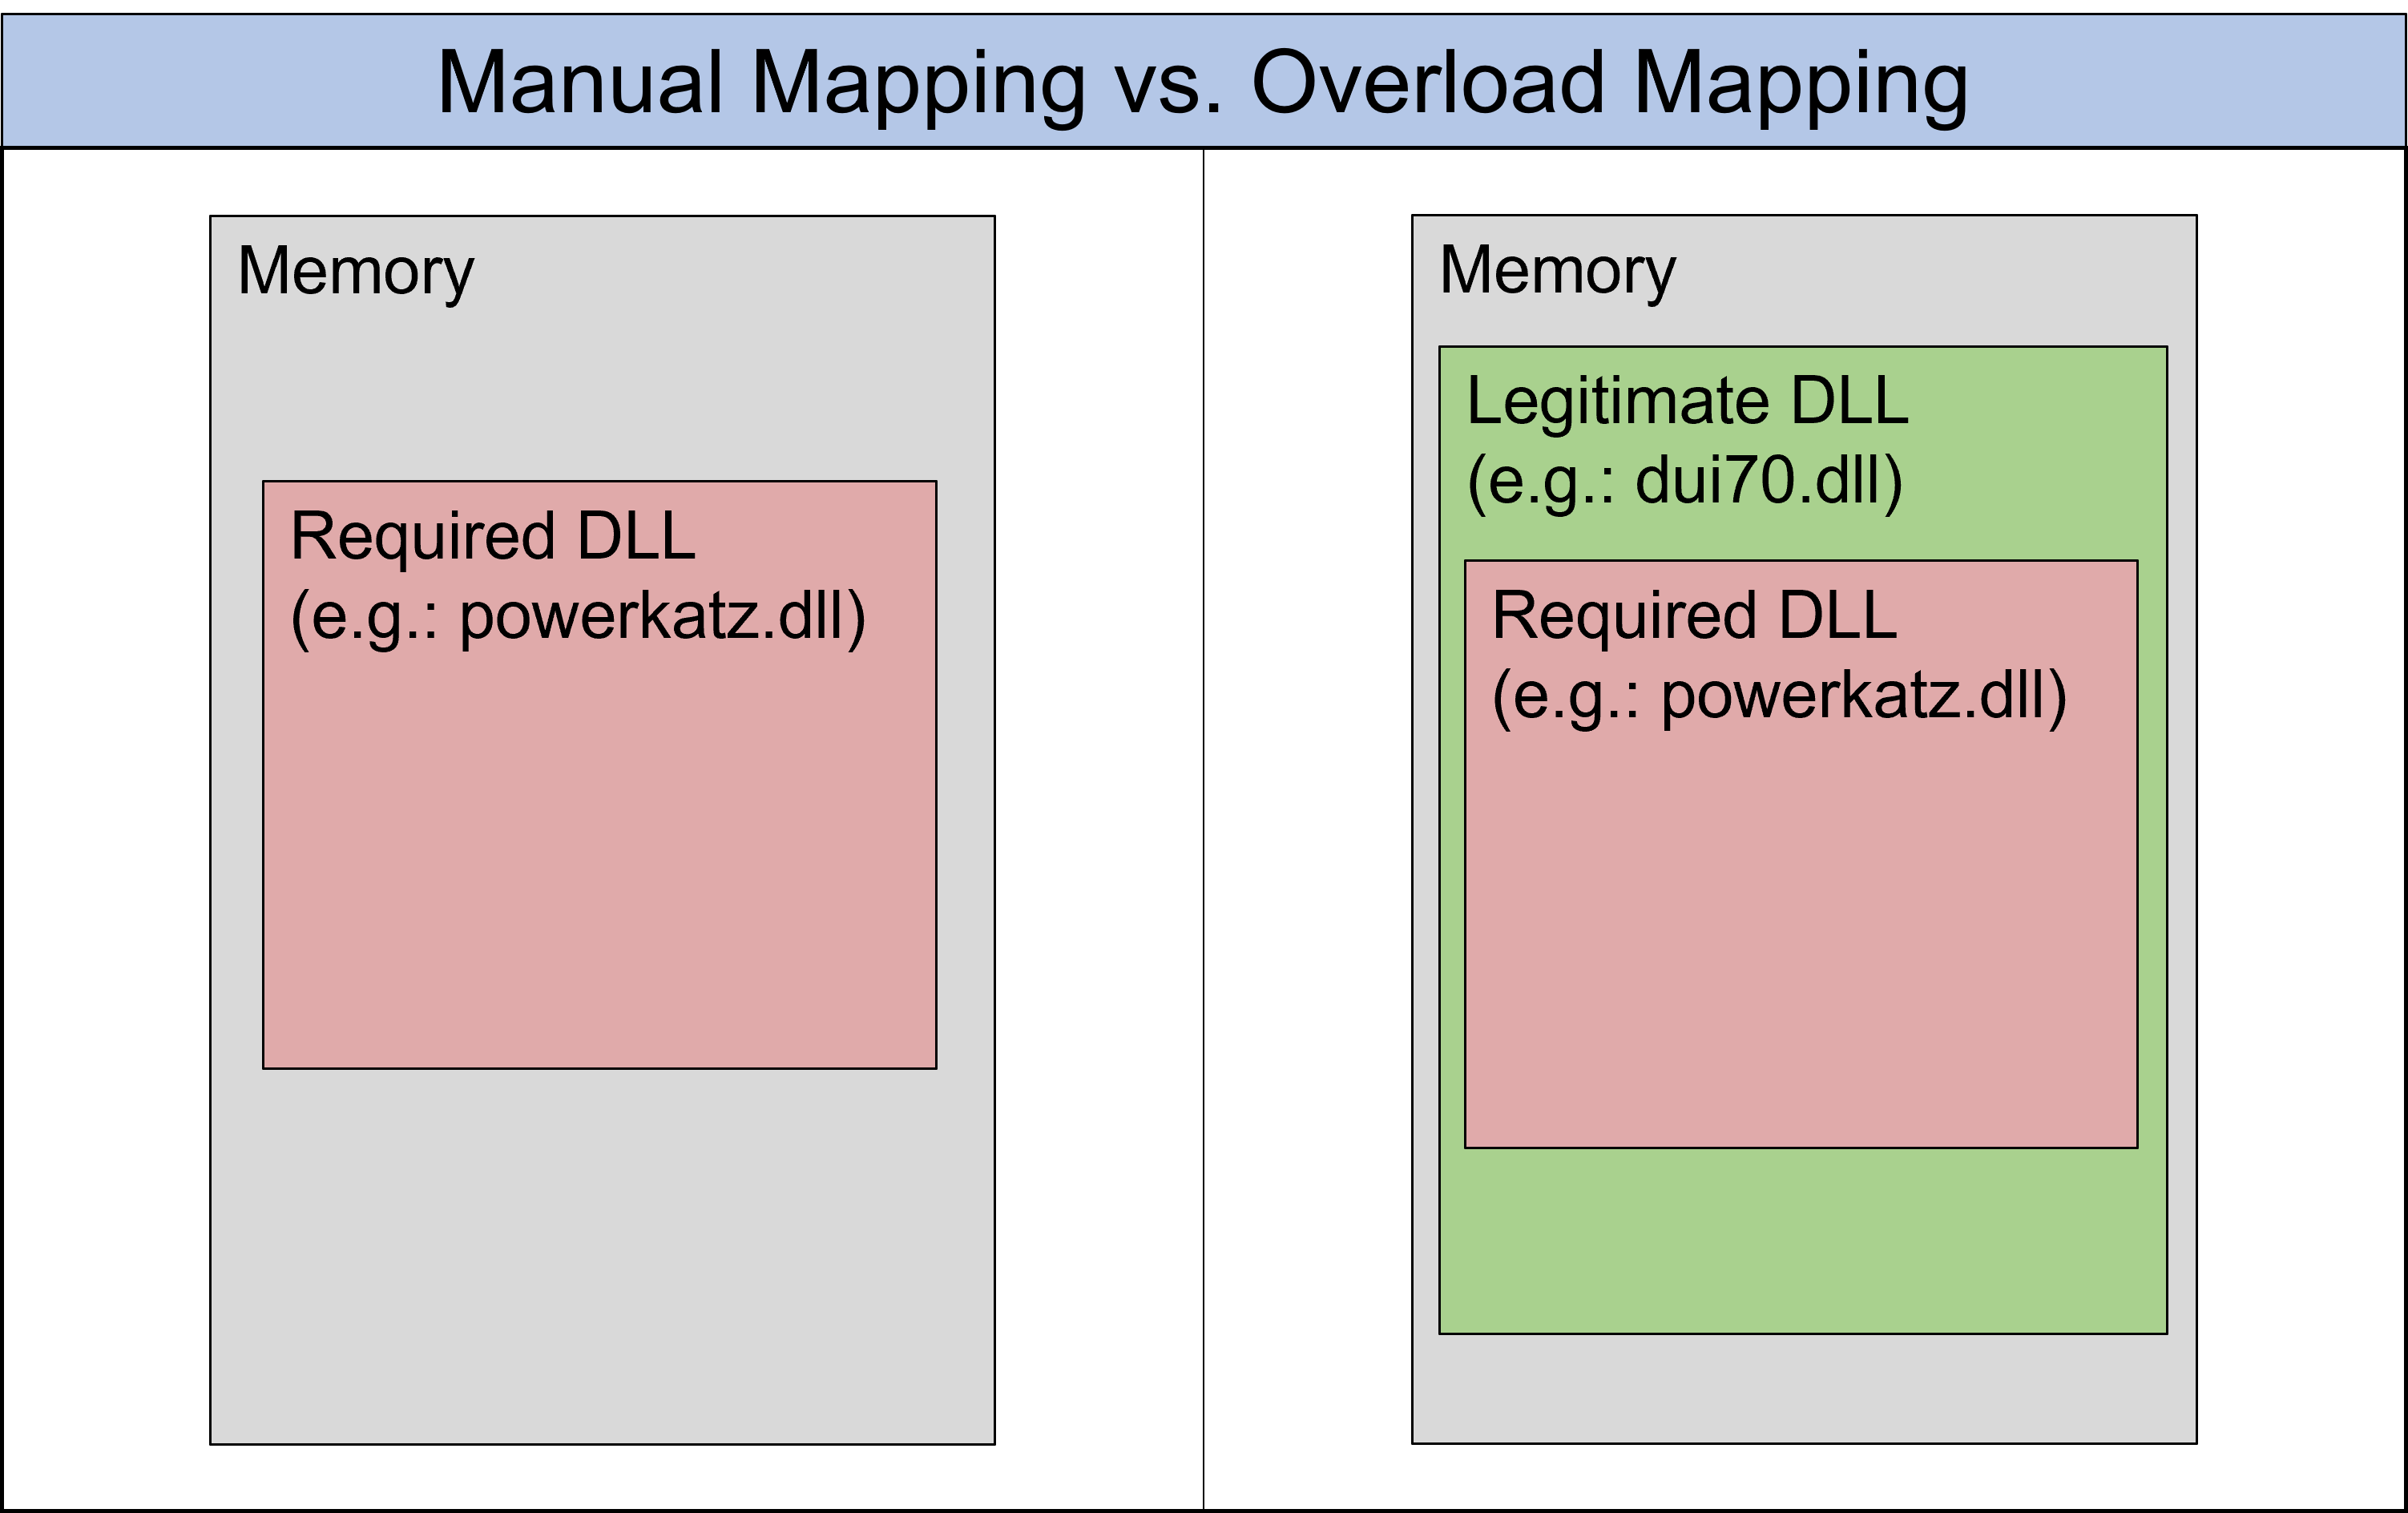 Manual Mapping vs. Overload Mapping